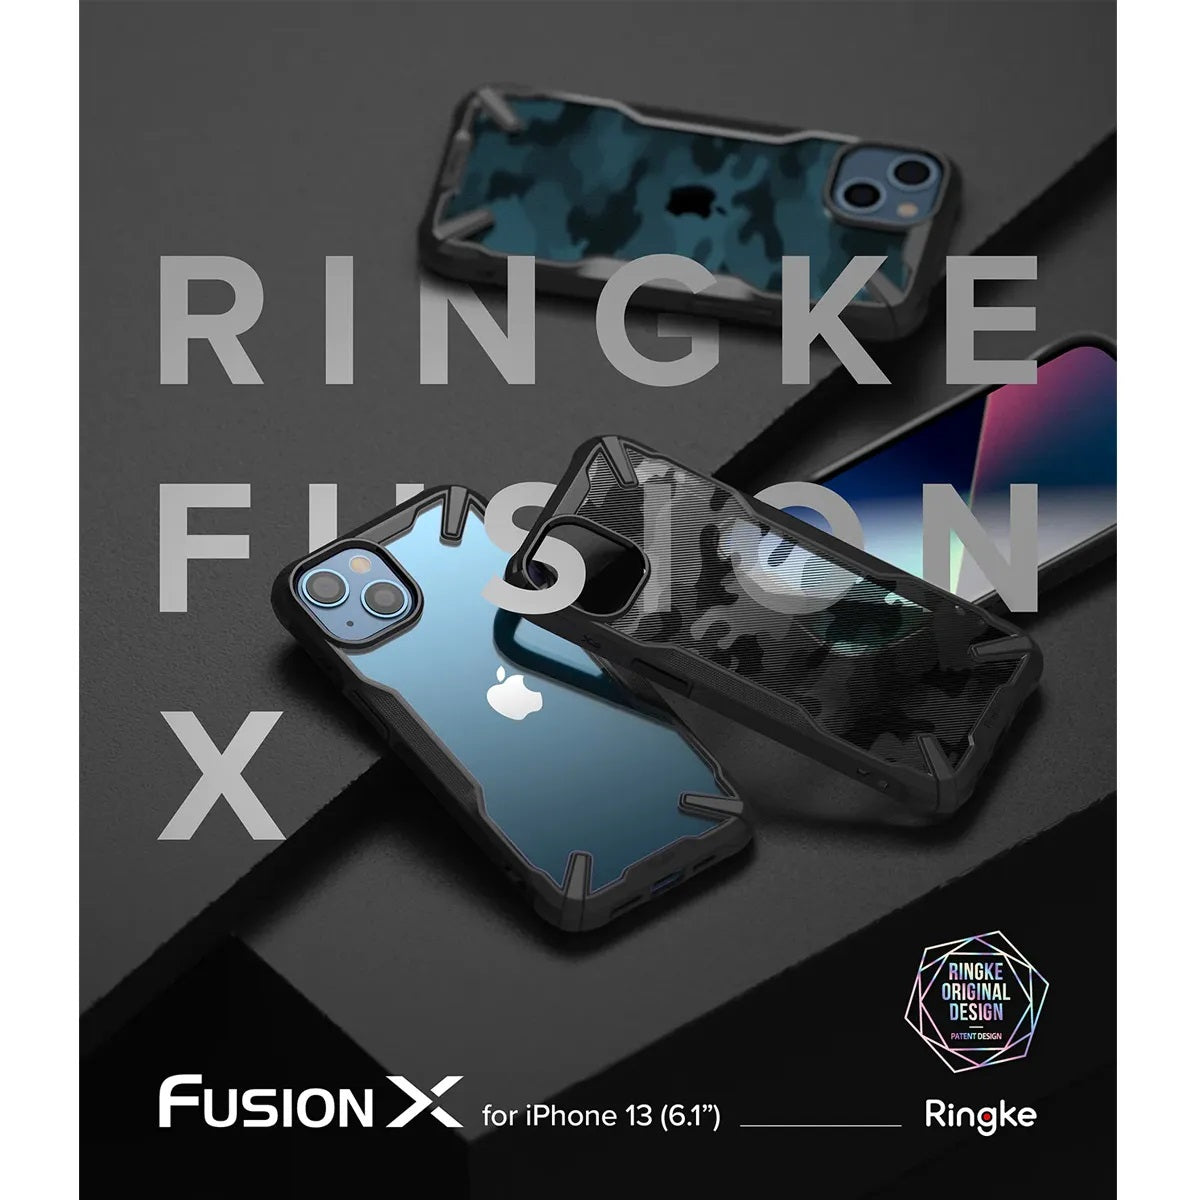 Ringke Fusion X Case for iPhone 13 Series (Black)